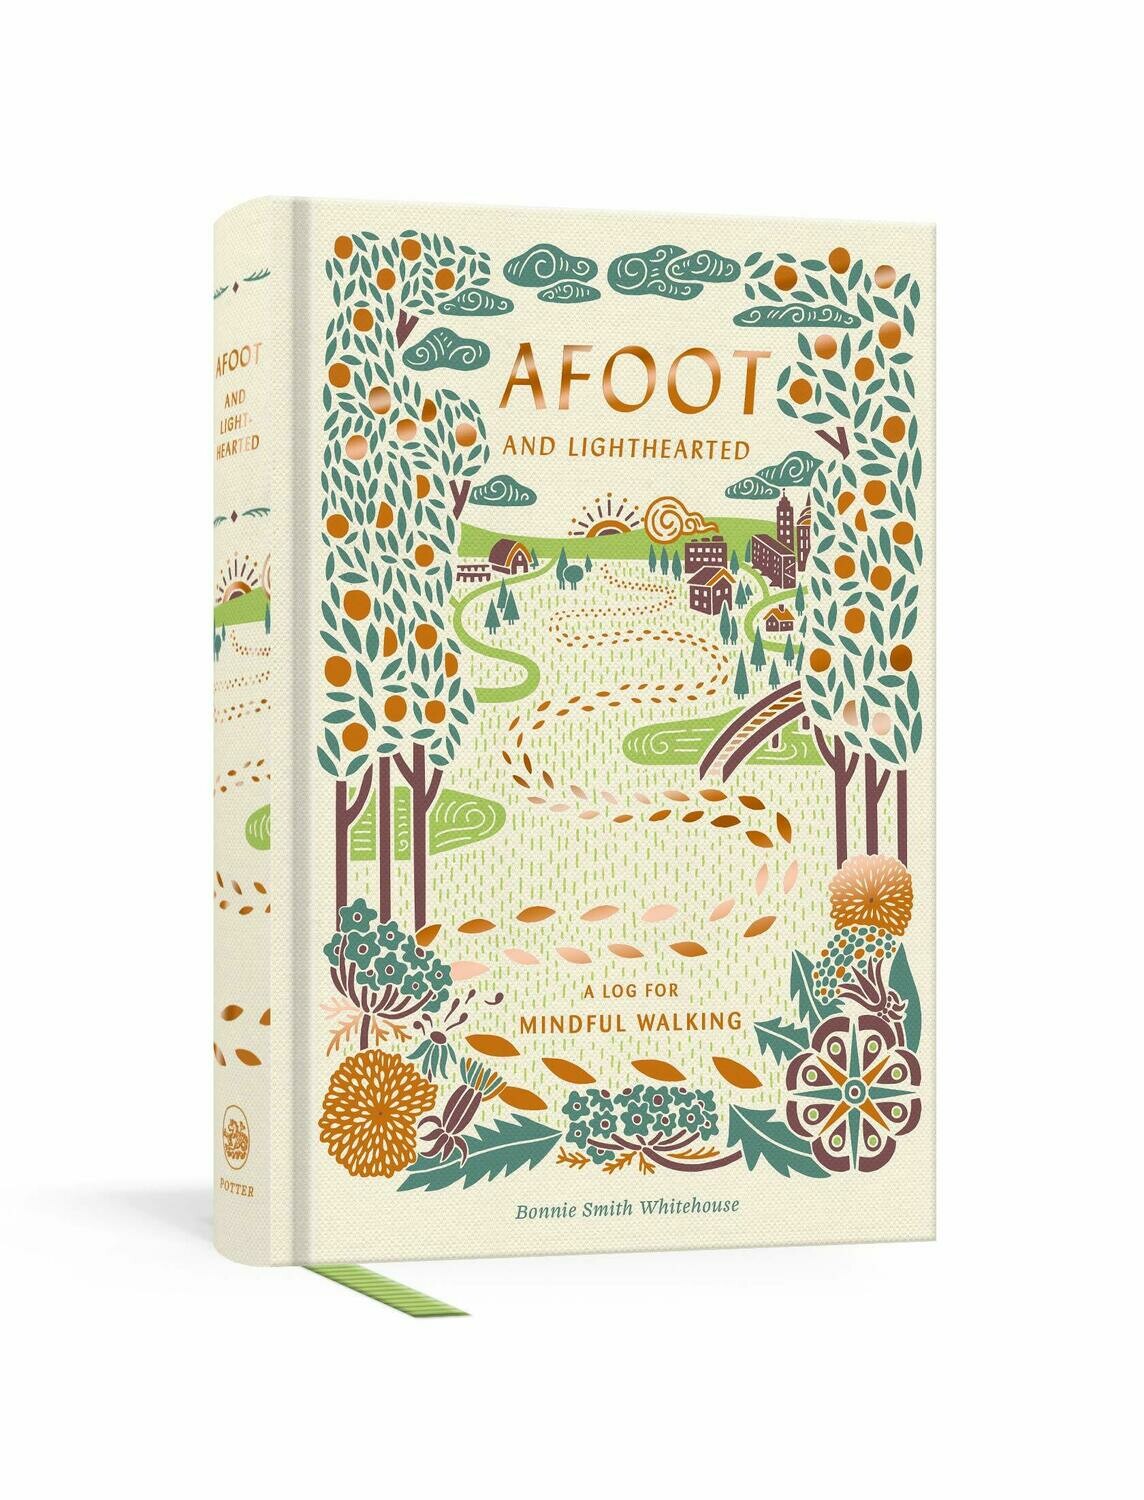 Afoot and Lighthearted: A Journal for Mindful Walking - Whitehouse - PB